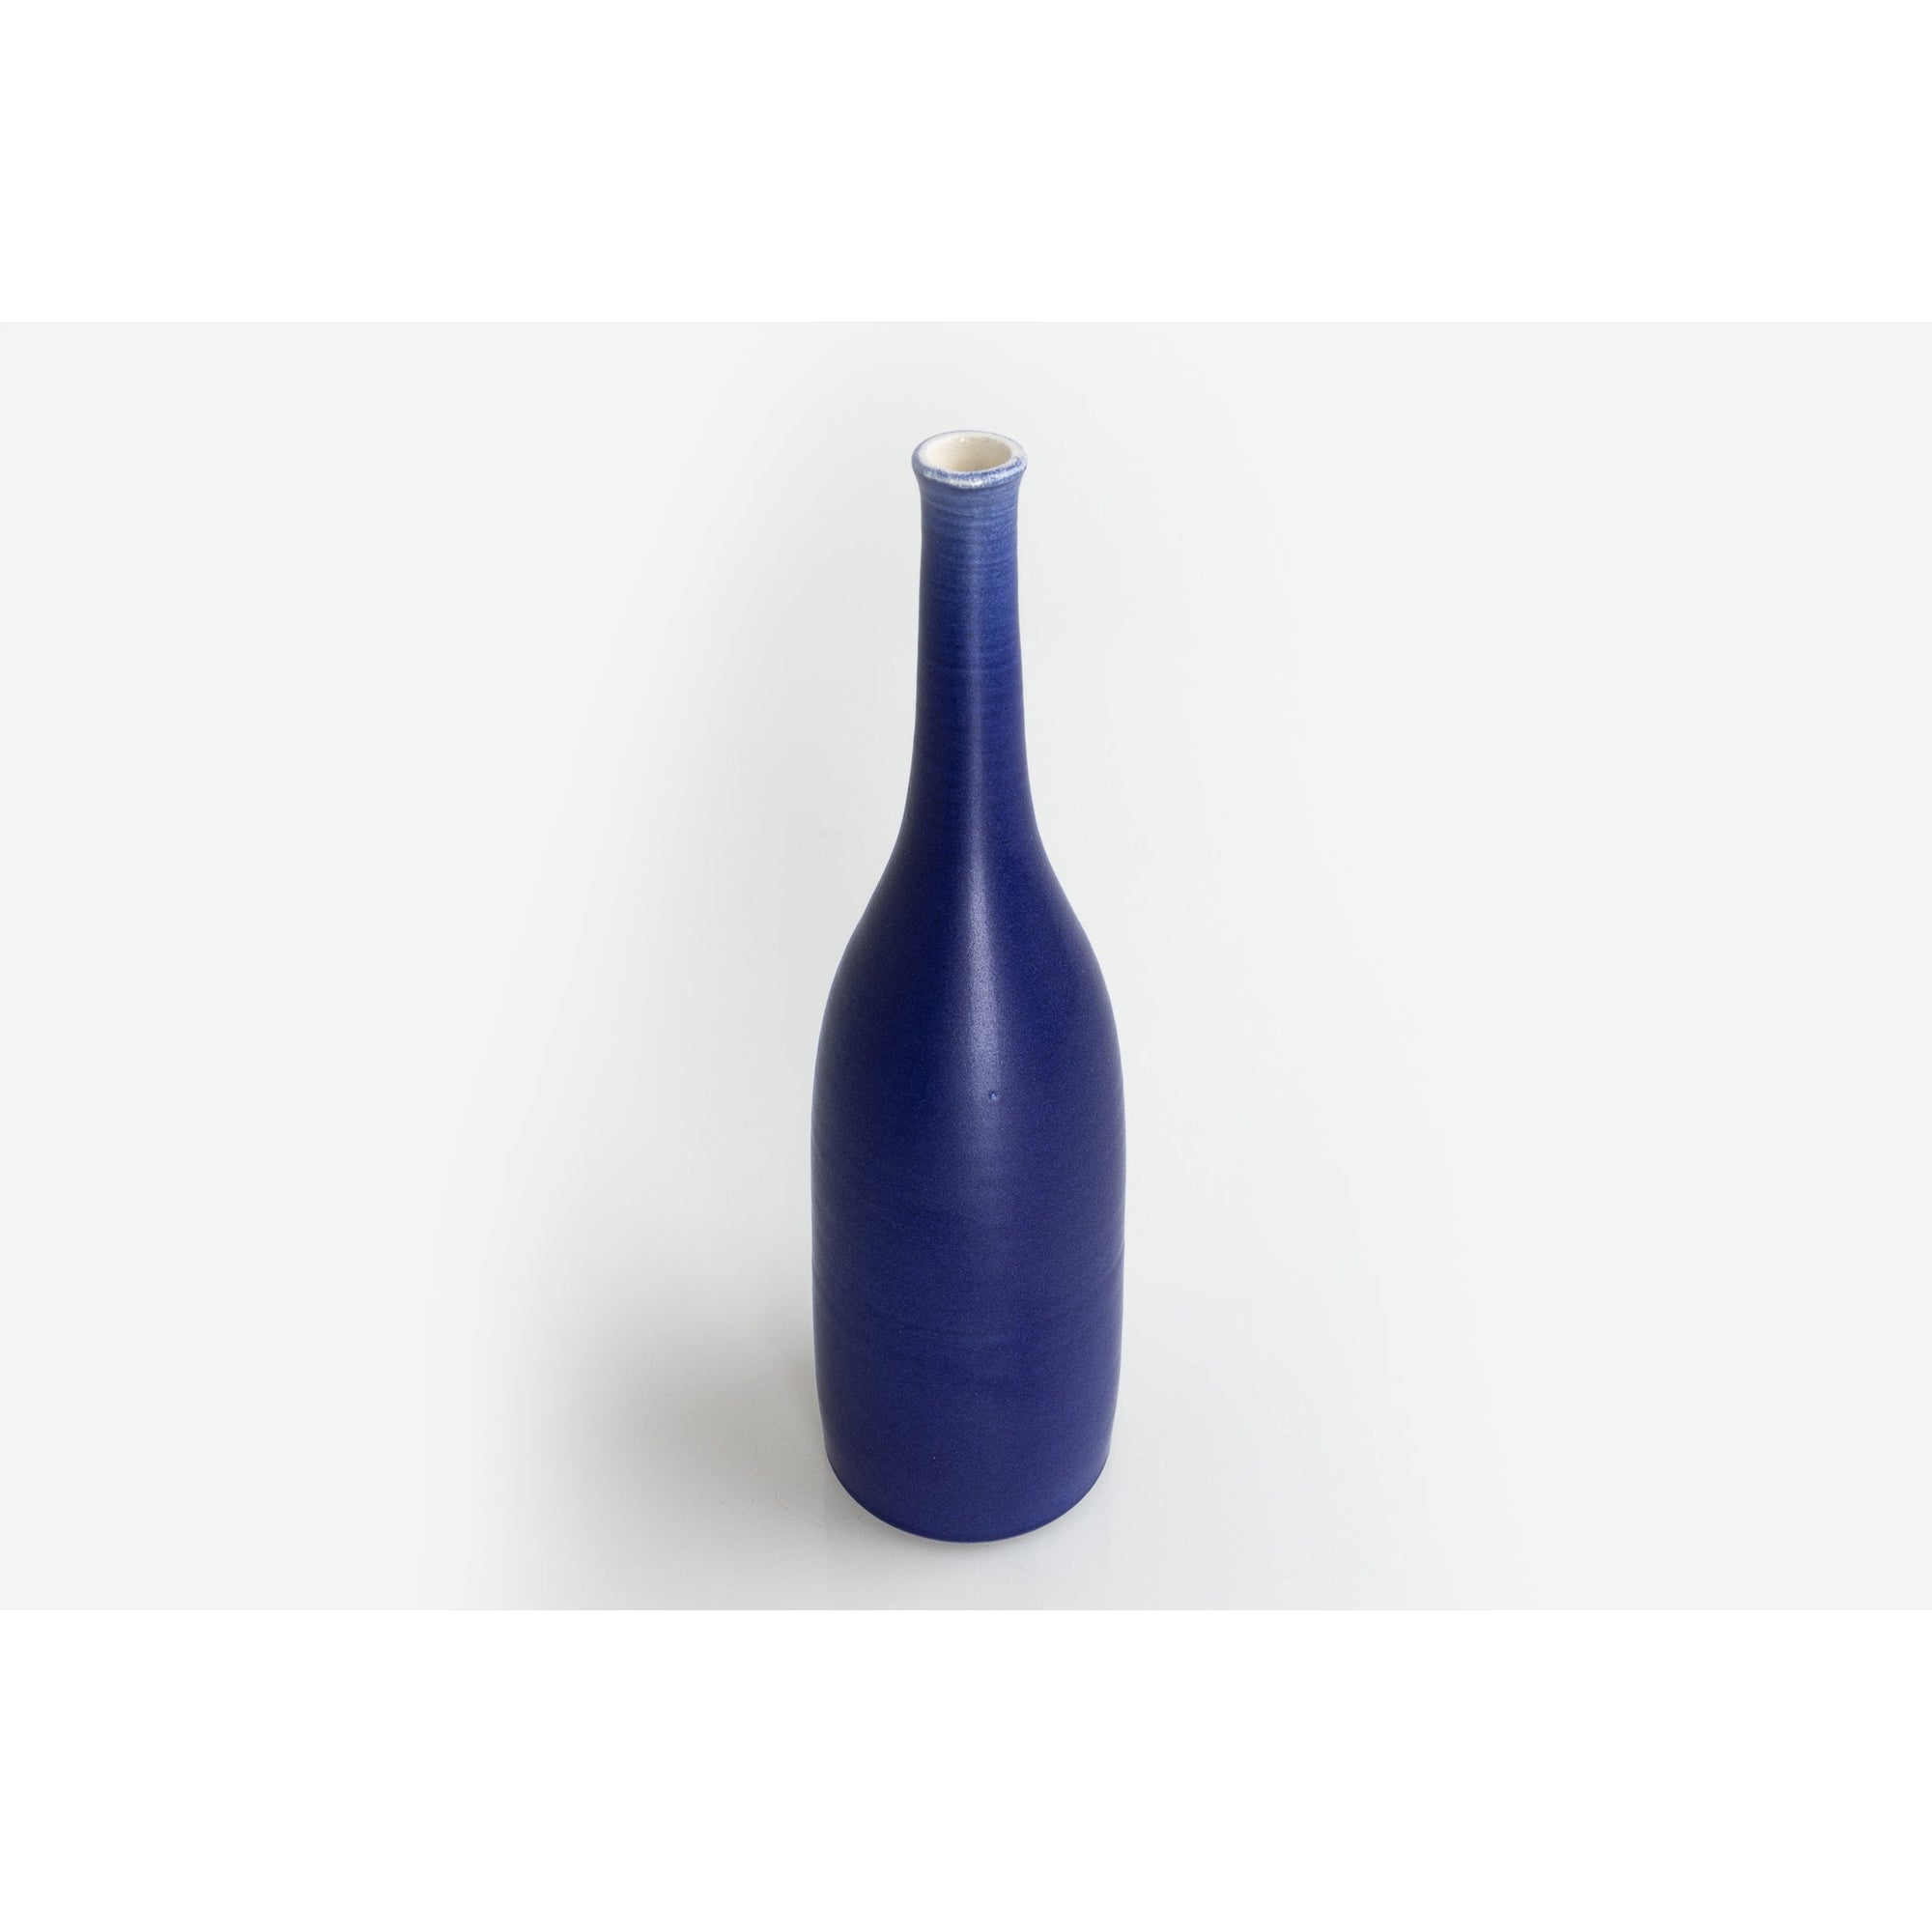 'LB149 Ultramarine Bottle' by Lucy Burley ceramics, available at Padstow Gallery, Cornwall